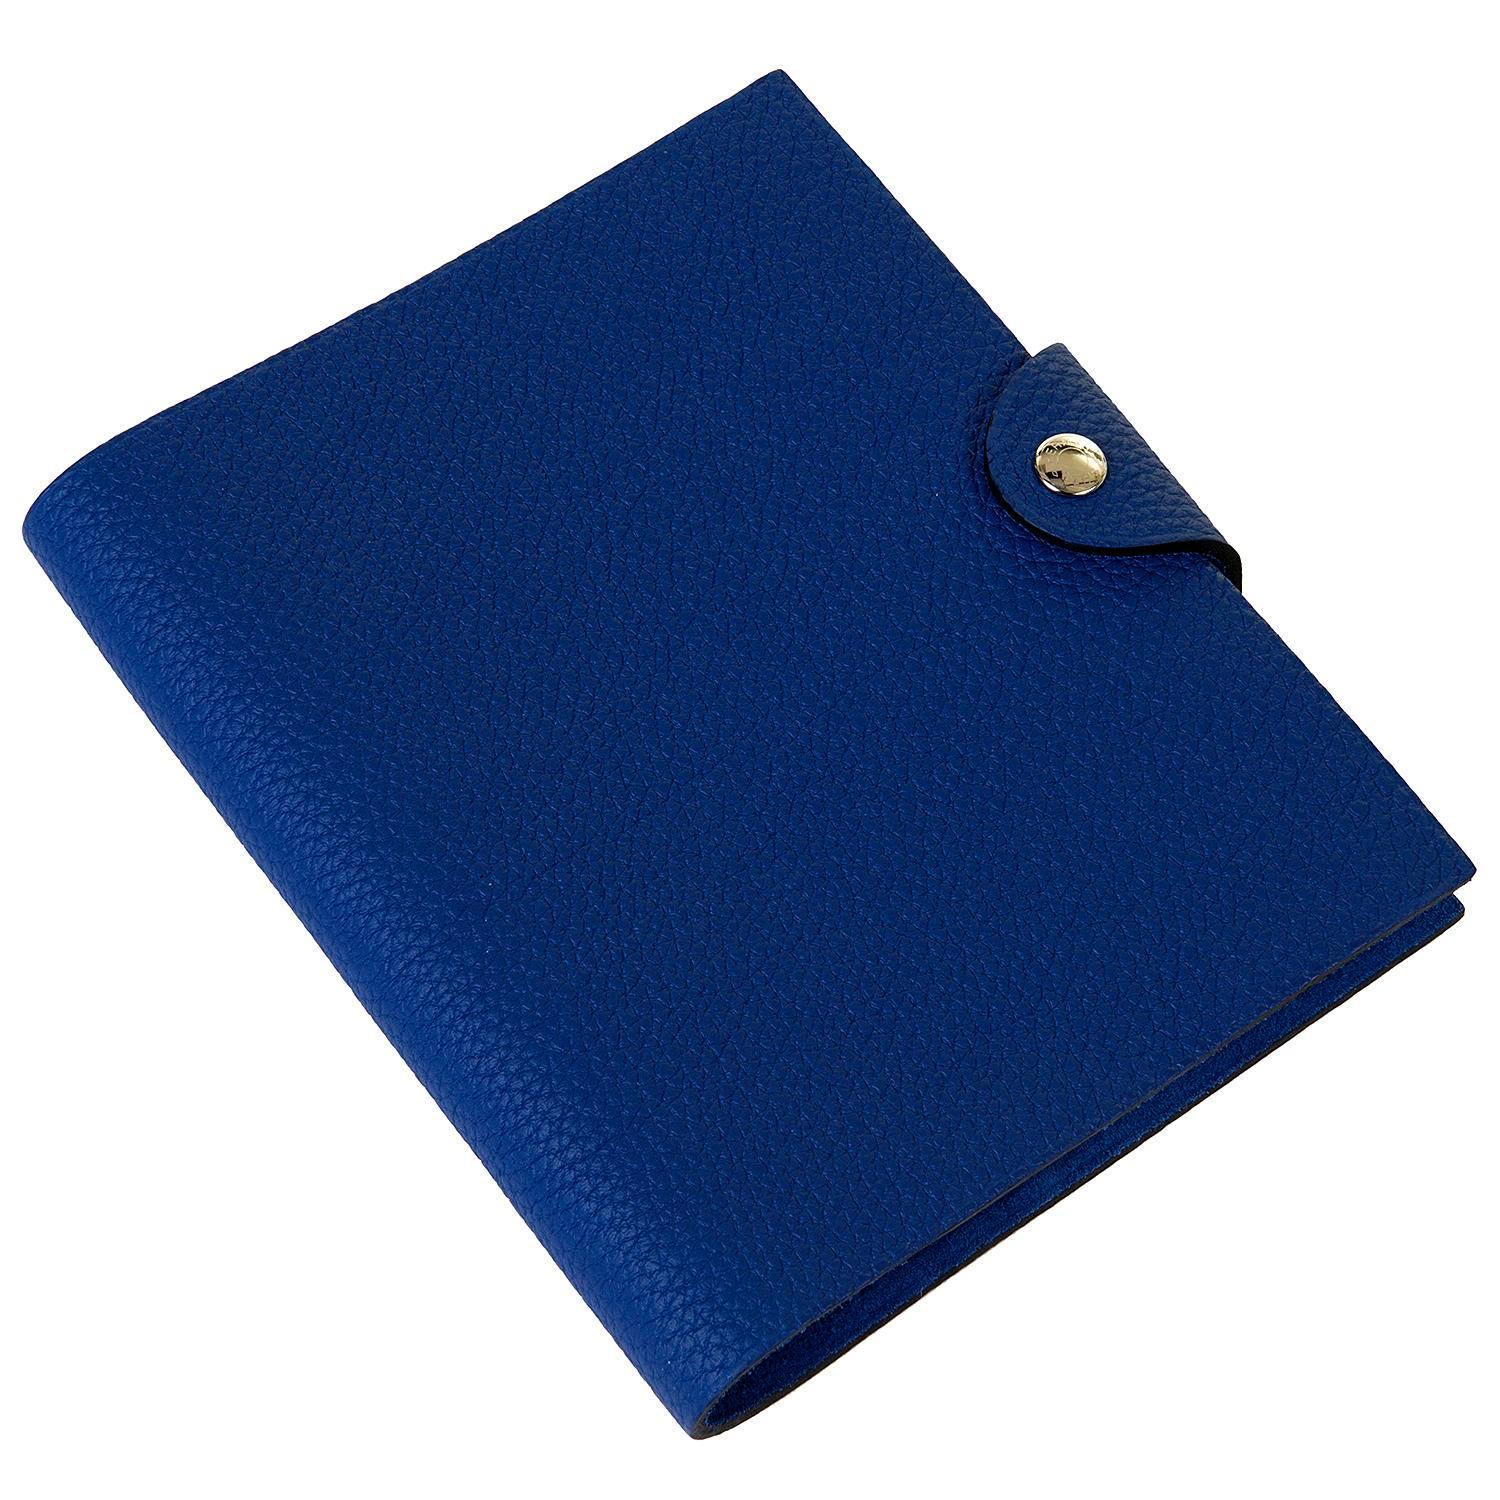 An fabulous Hermes 'Ulysse' Porte-Agenda in 'New & Unused' condition, complete with a new Hermes stationary insert and its distinctive Hermes box. 'Blue Electrique' - Absolutely the colour to have ! The PERFECT Xmas Gift.

FREE WORLDWIDE DELIVERY